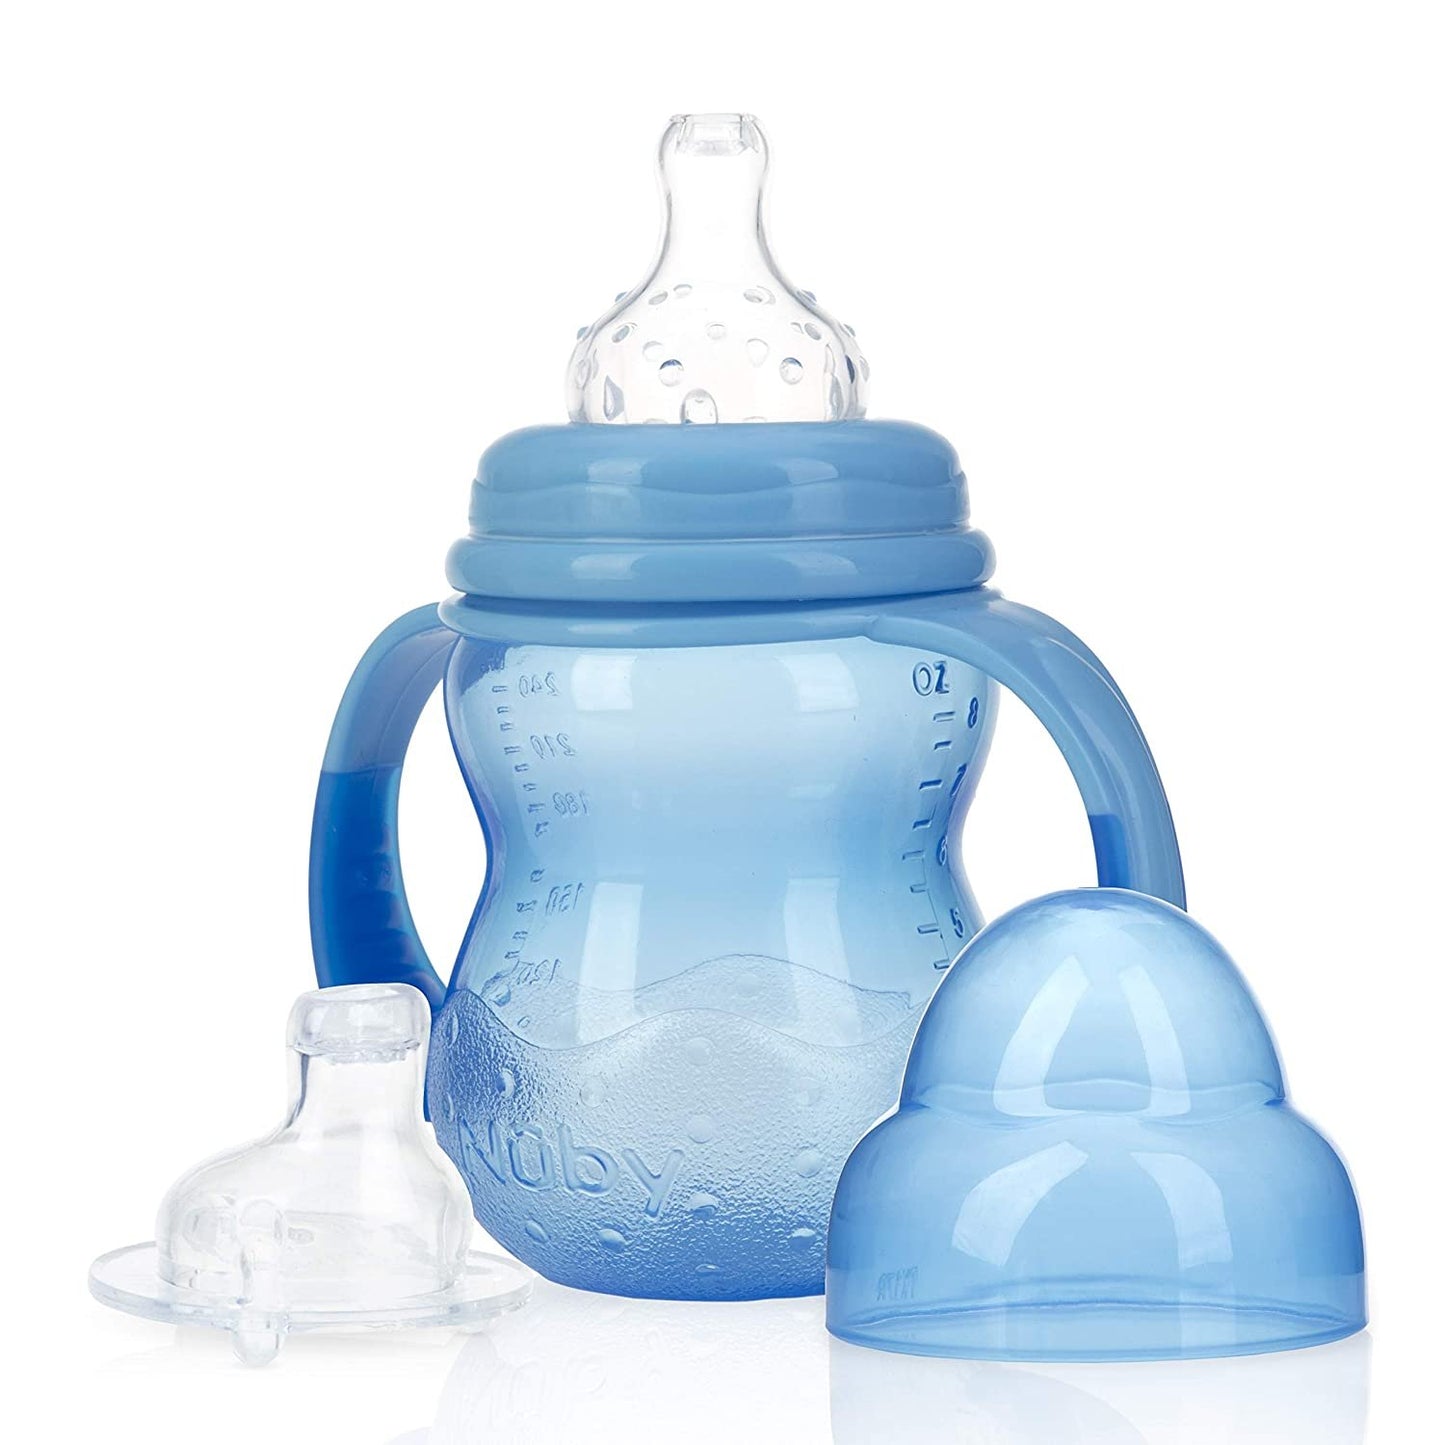 Nuby 3-Stage Wide Neck No Spill Bottle with Handles And Non-Drip Juice Spout, 3 Months, 8 Ounce, Blue